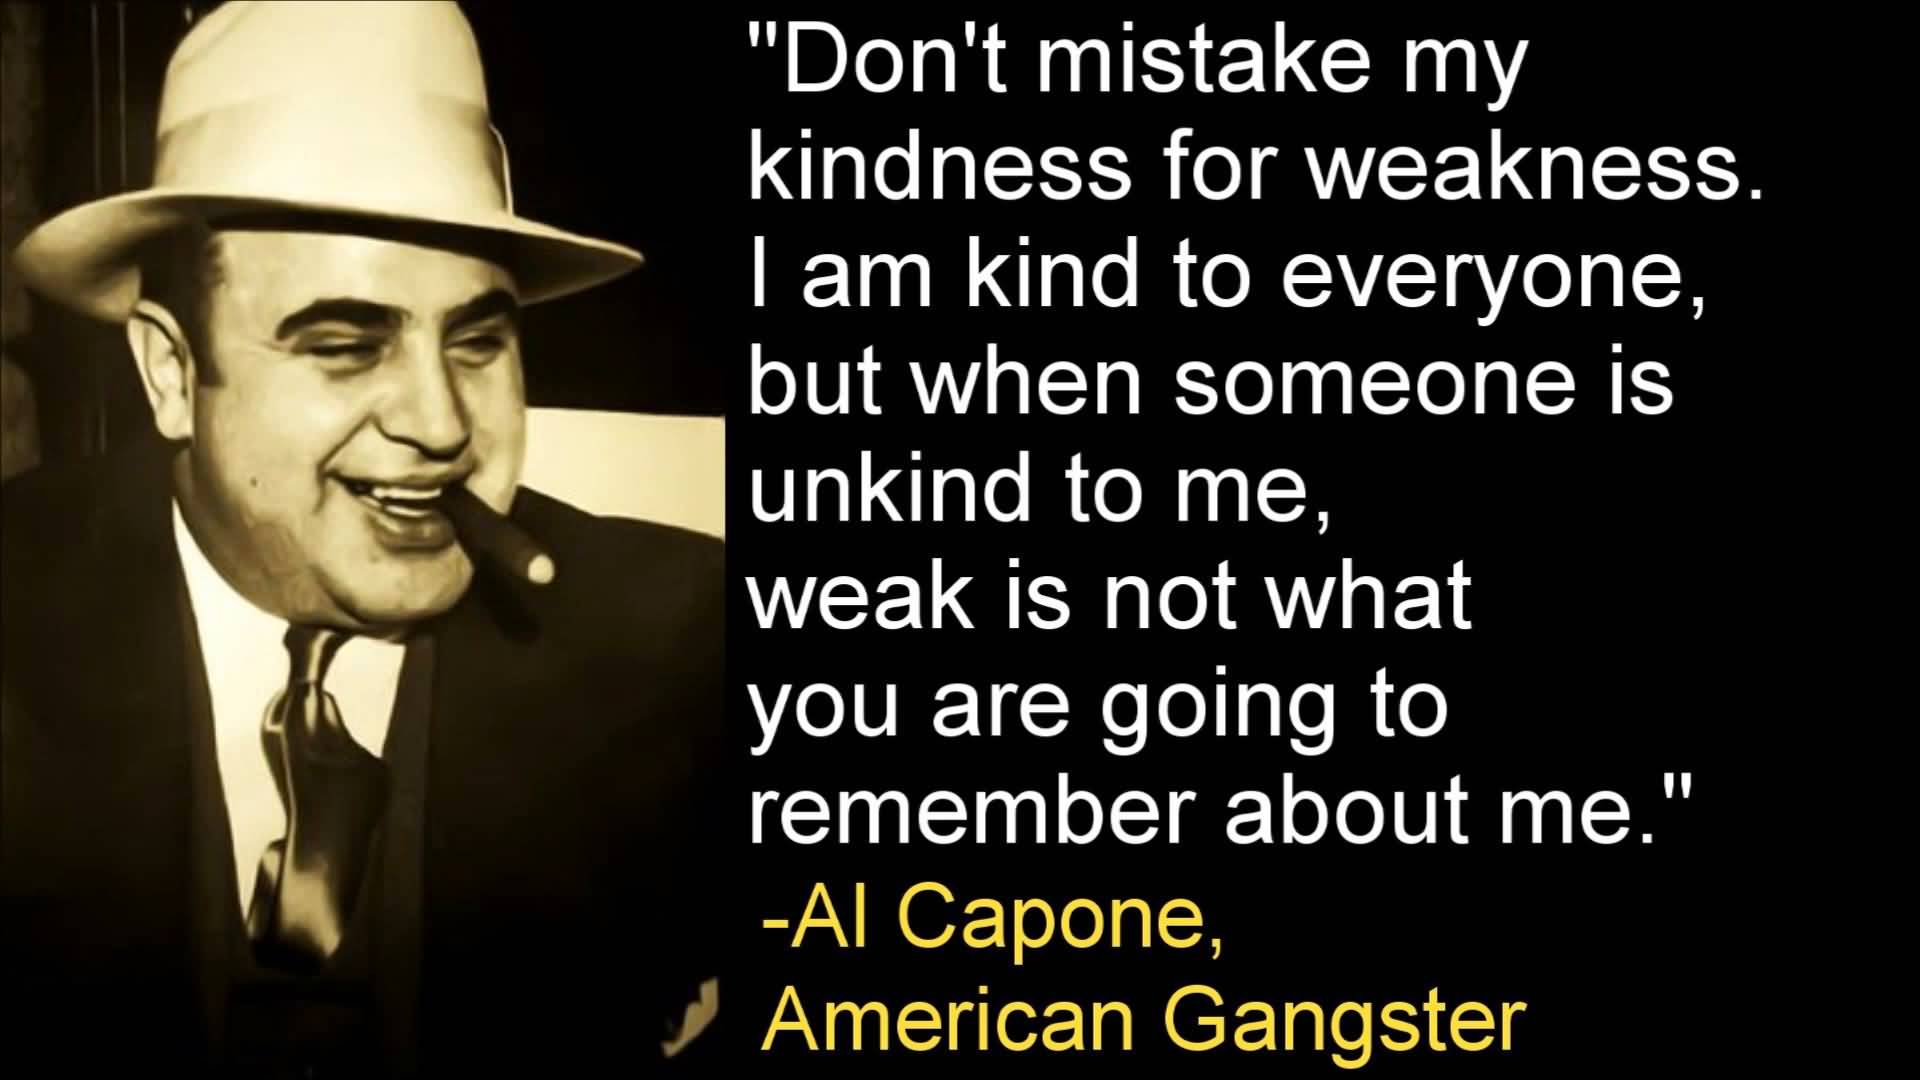 La Capone Quotes Don't Mistake My Kindness